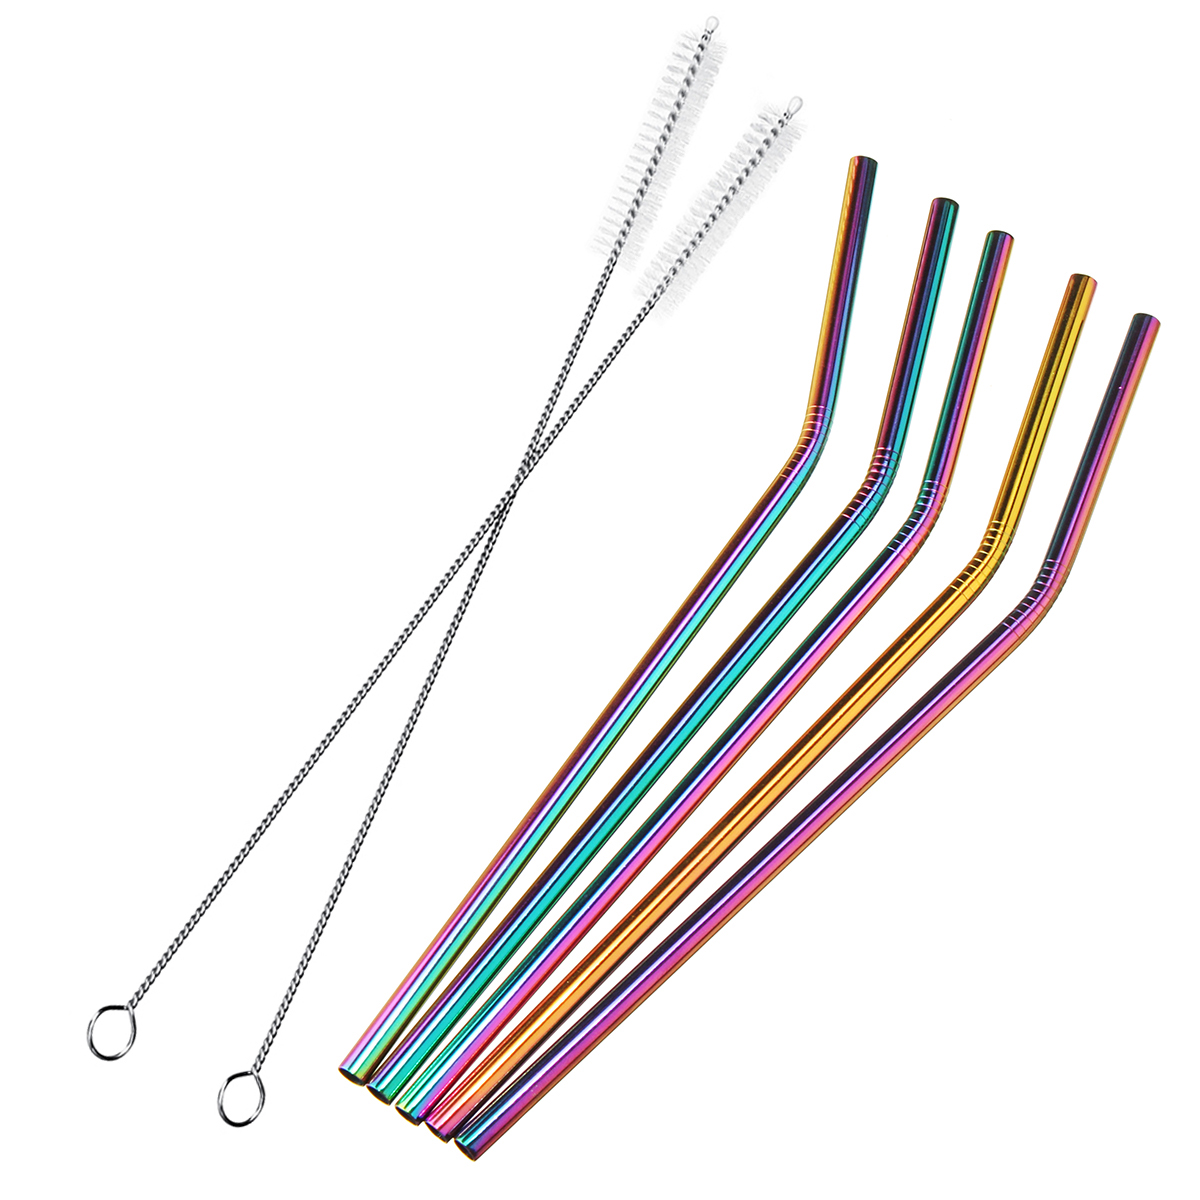 7PCS-Premium-Stainless-Steel-Metal-Drinking-Straw-Reusable-Straws-Set-With-Cleaner-Brushes-1347731-5